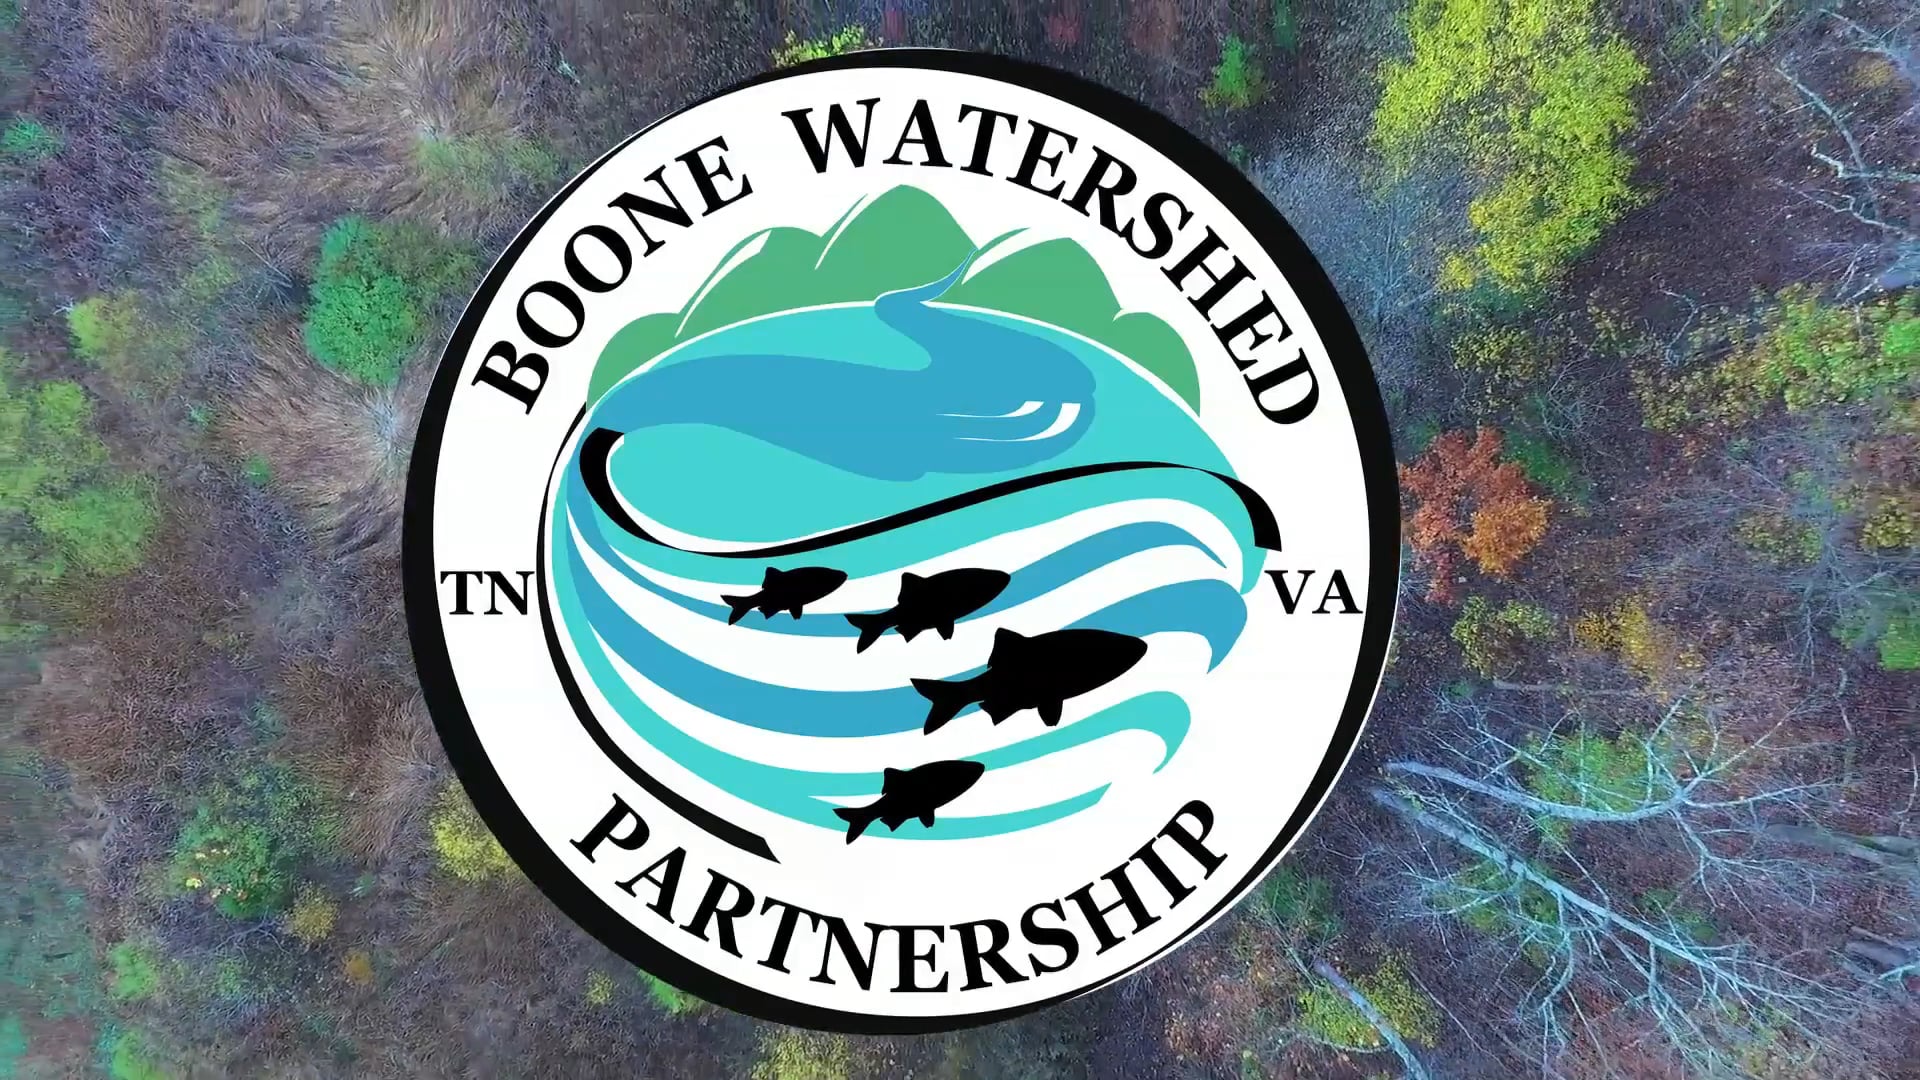 Boone Watershed Partnership